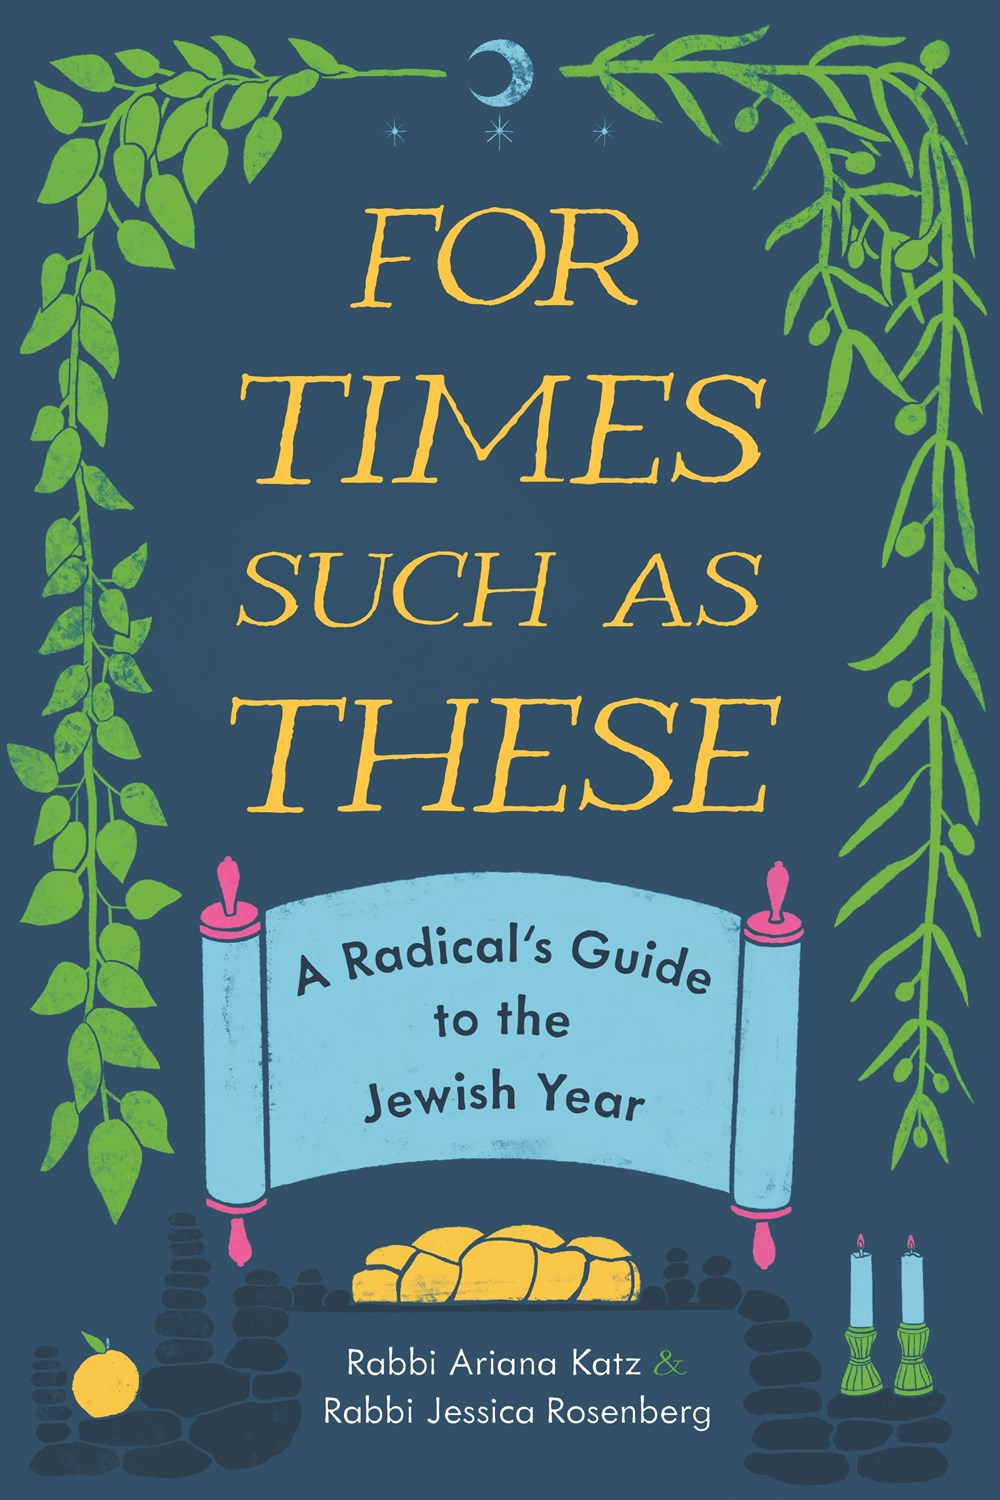 For Times Such as These: A Radical’s Guide to the Jewish Year